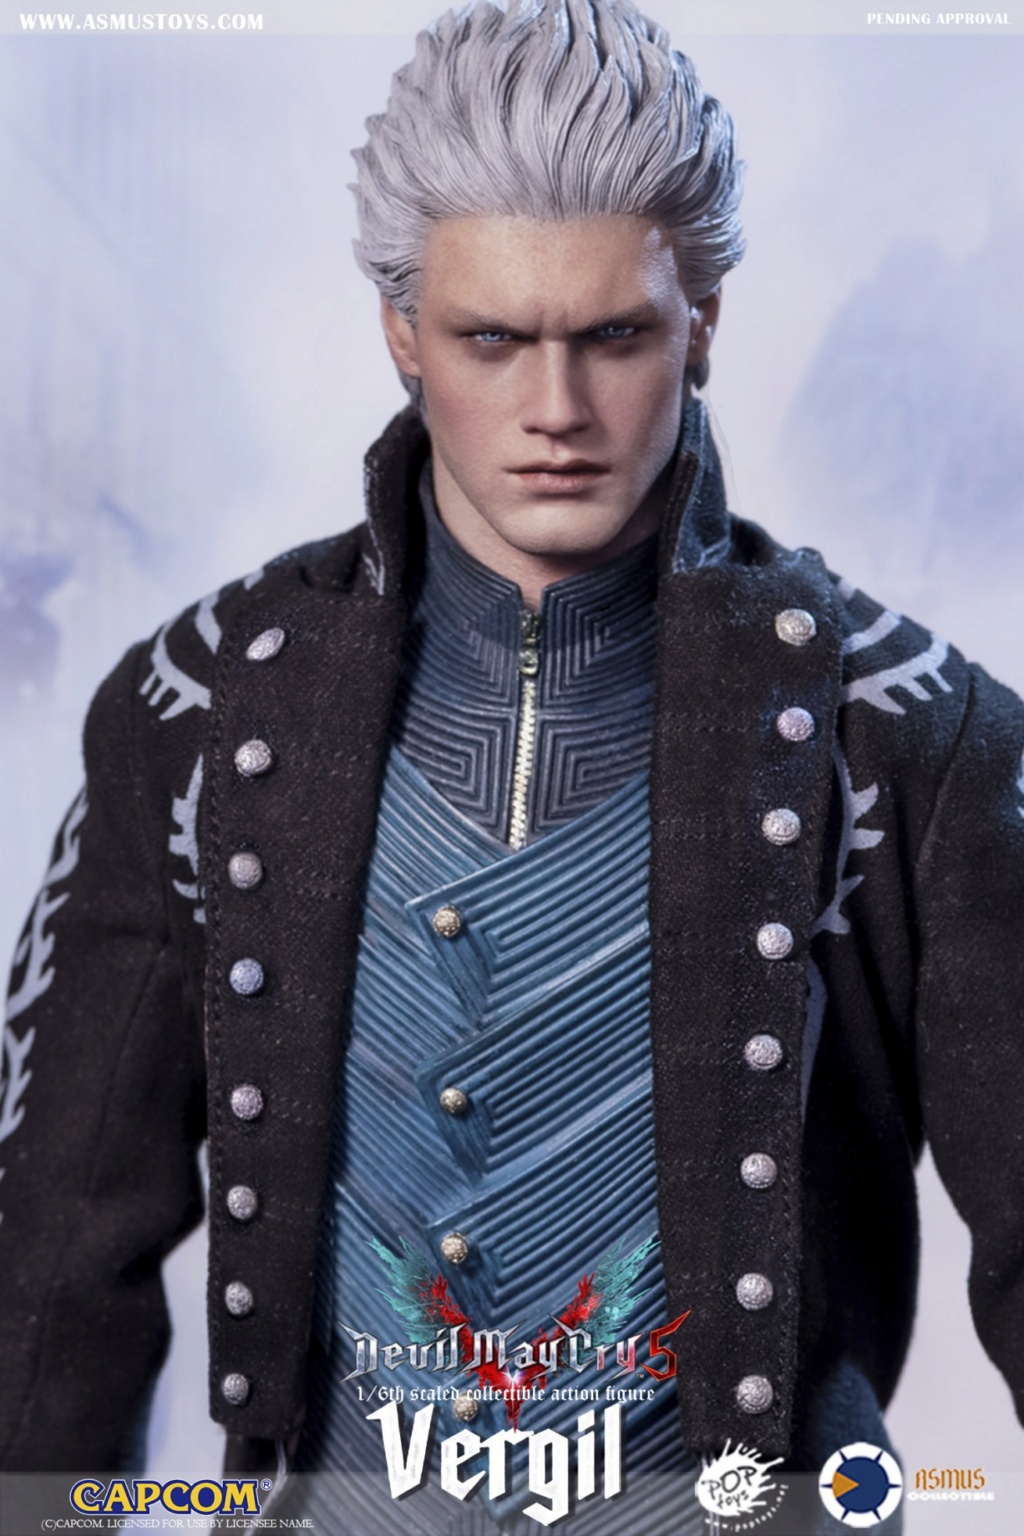 NEW PRODUCT: Asmus Toys New Products: 1/6 "Devil Hunter/Devil May Cry 5" series-Virgil Standard & Deluxe Edition 180d2210